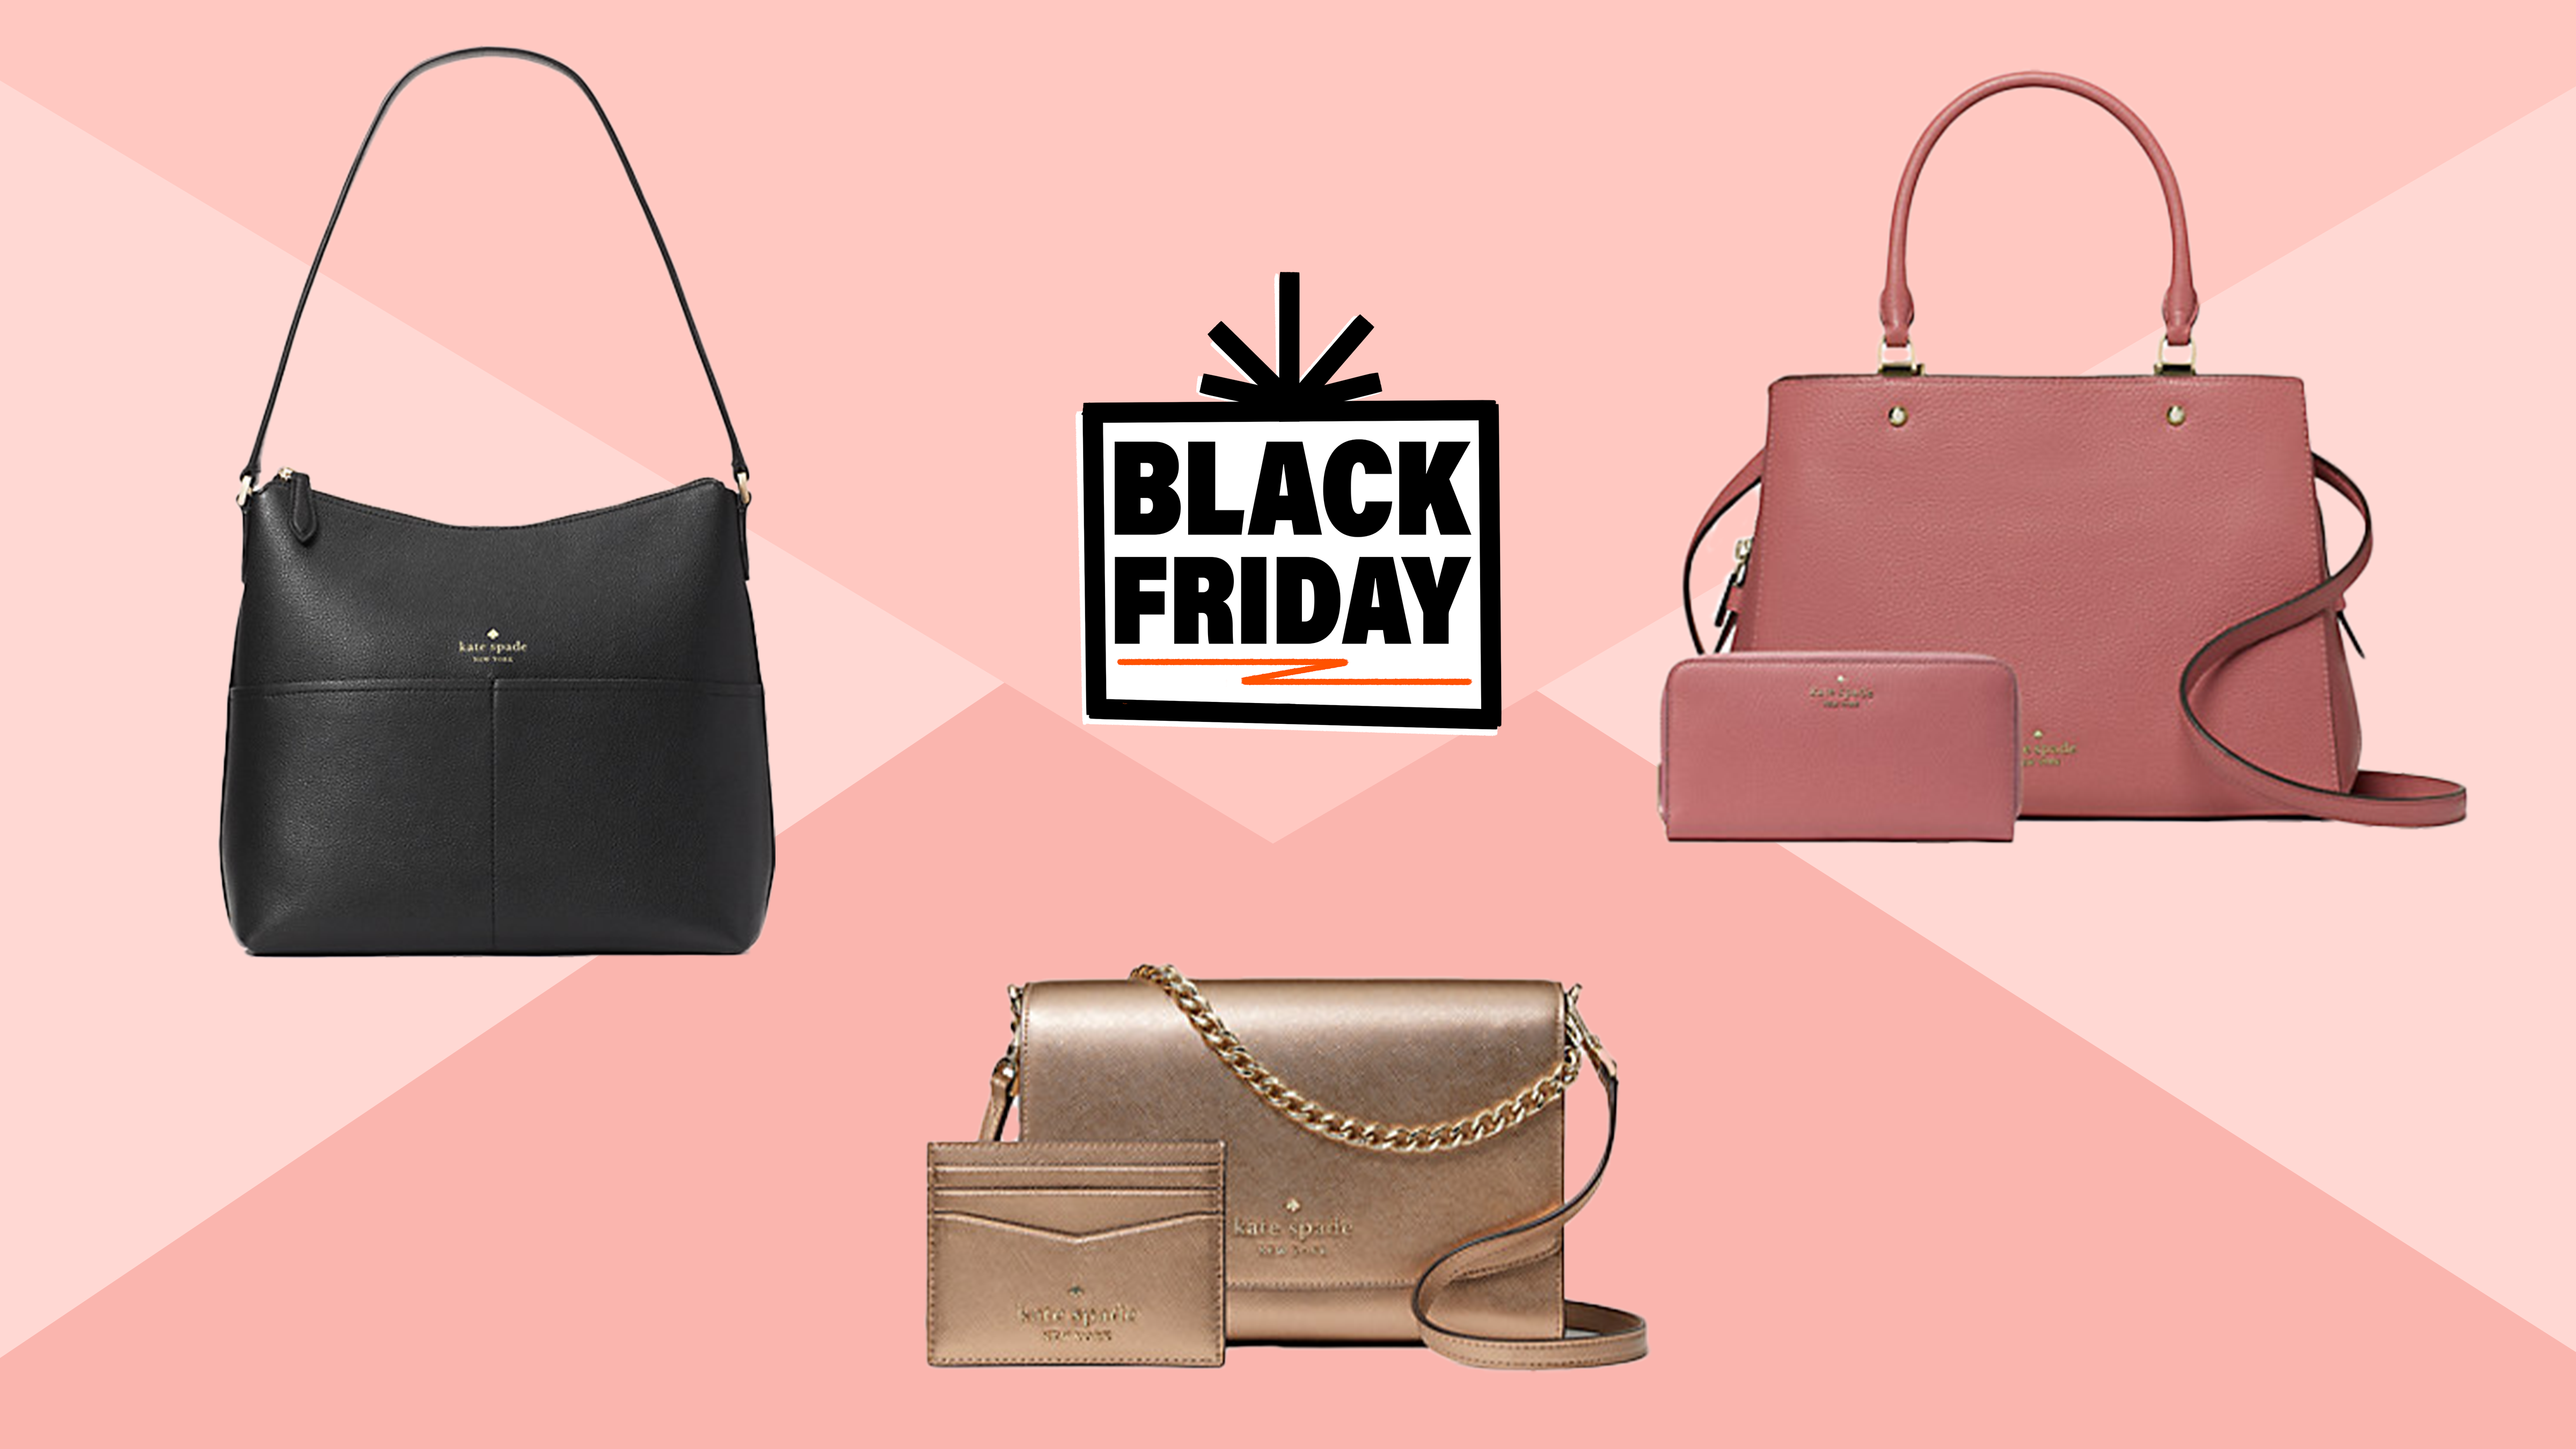 Kate Spade Black Friday isn't over yet—save big at the Surprise Sale during Cyber Monday